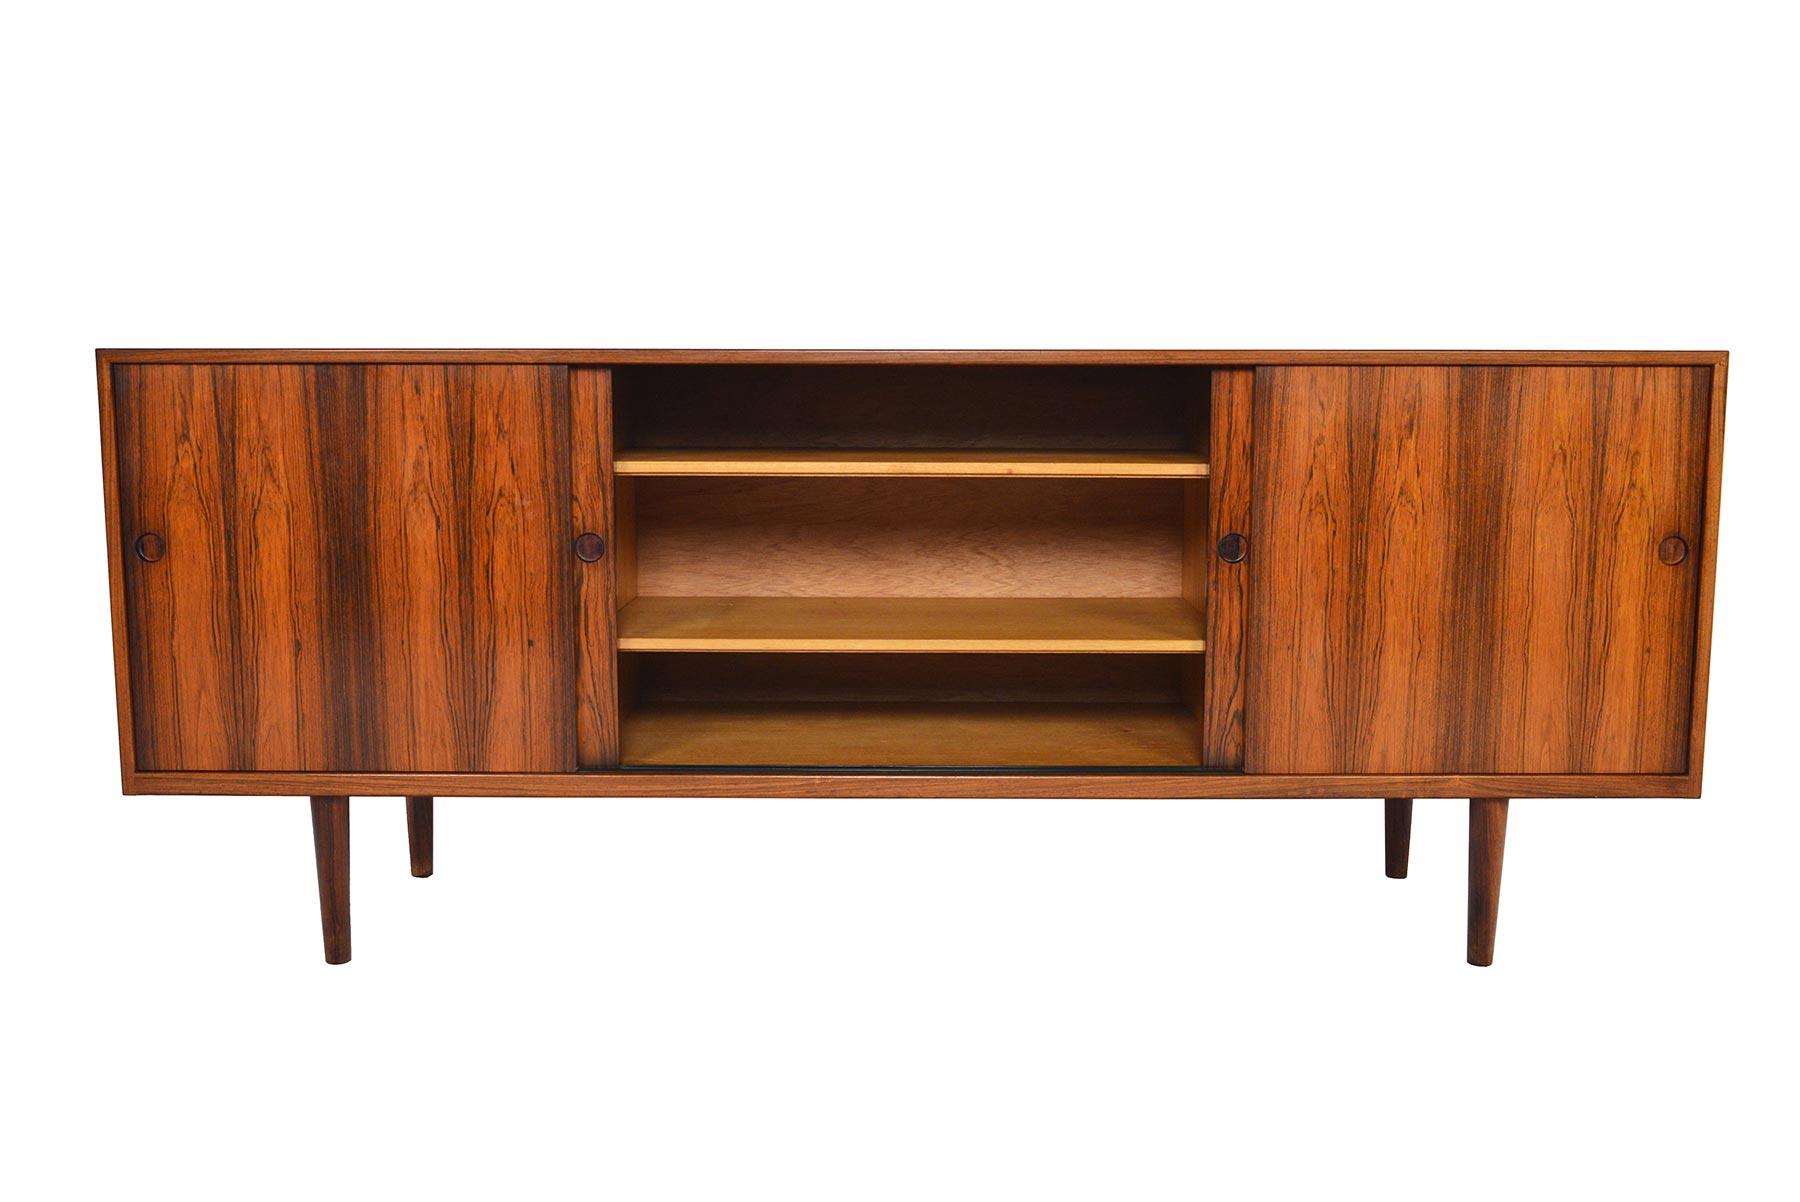 Beautifully simple and effortlessly modern, this Danish modern credenza in rosewood offers exceptional grain patterns on all sides. Four sliding doors with carved pulls open to reveal three bays with adjustable shelving. The left and right bays